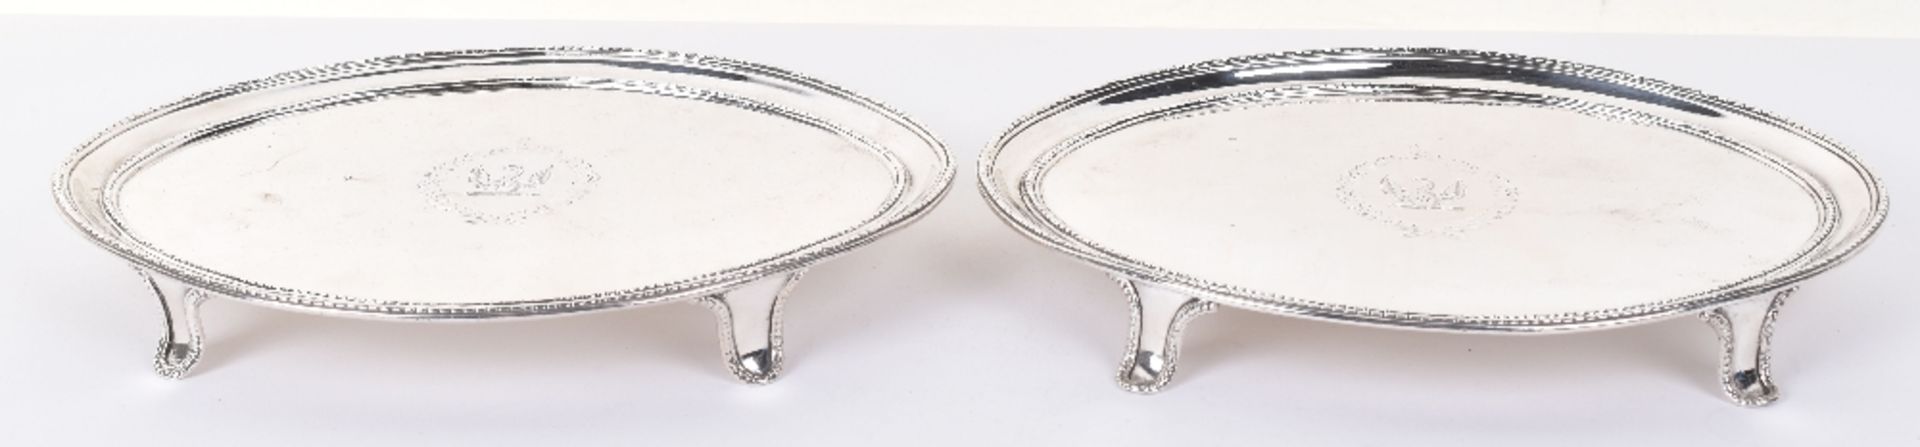 A pair of George III silver salvers, by Thomas Chawner, London 1784 - Image 4 of 6